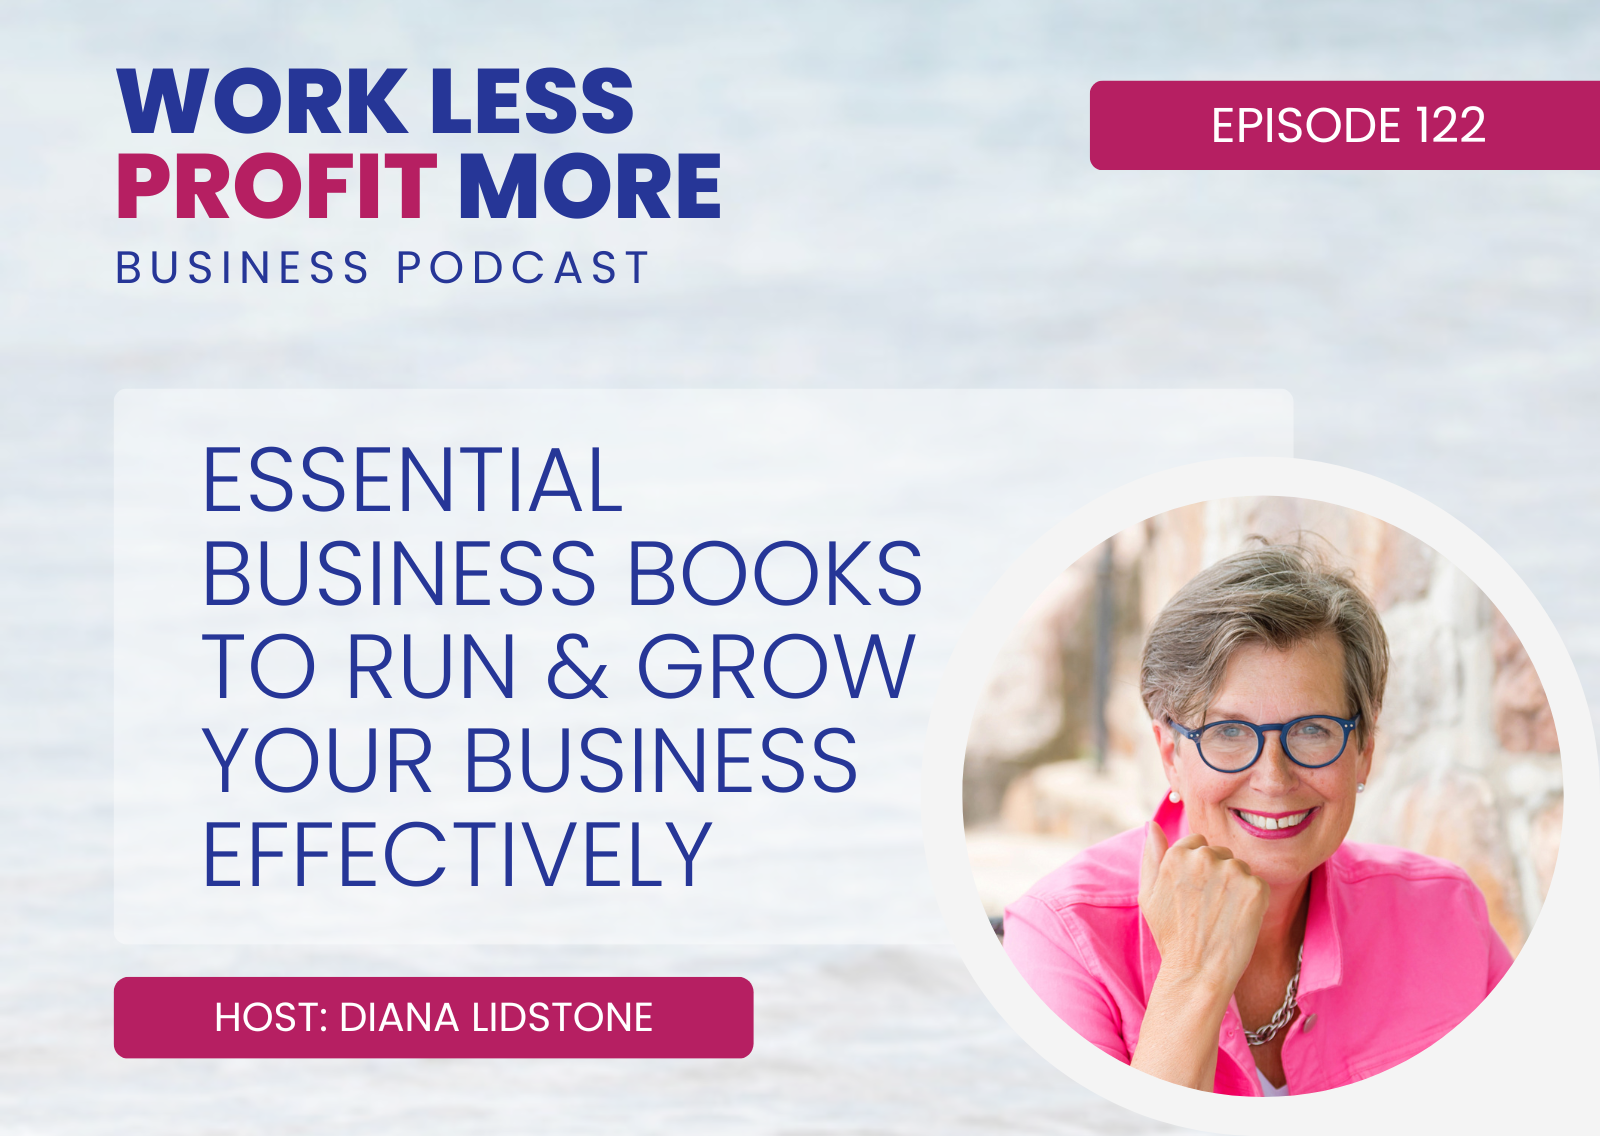 Essential Business Books to run & grow your business effectively